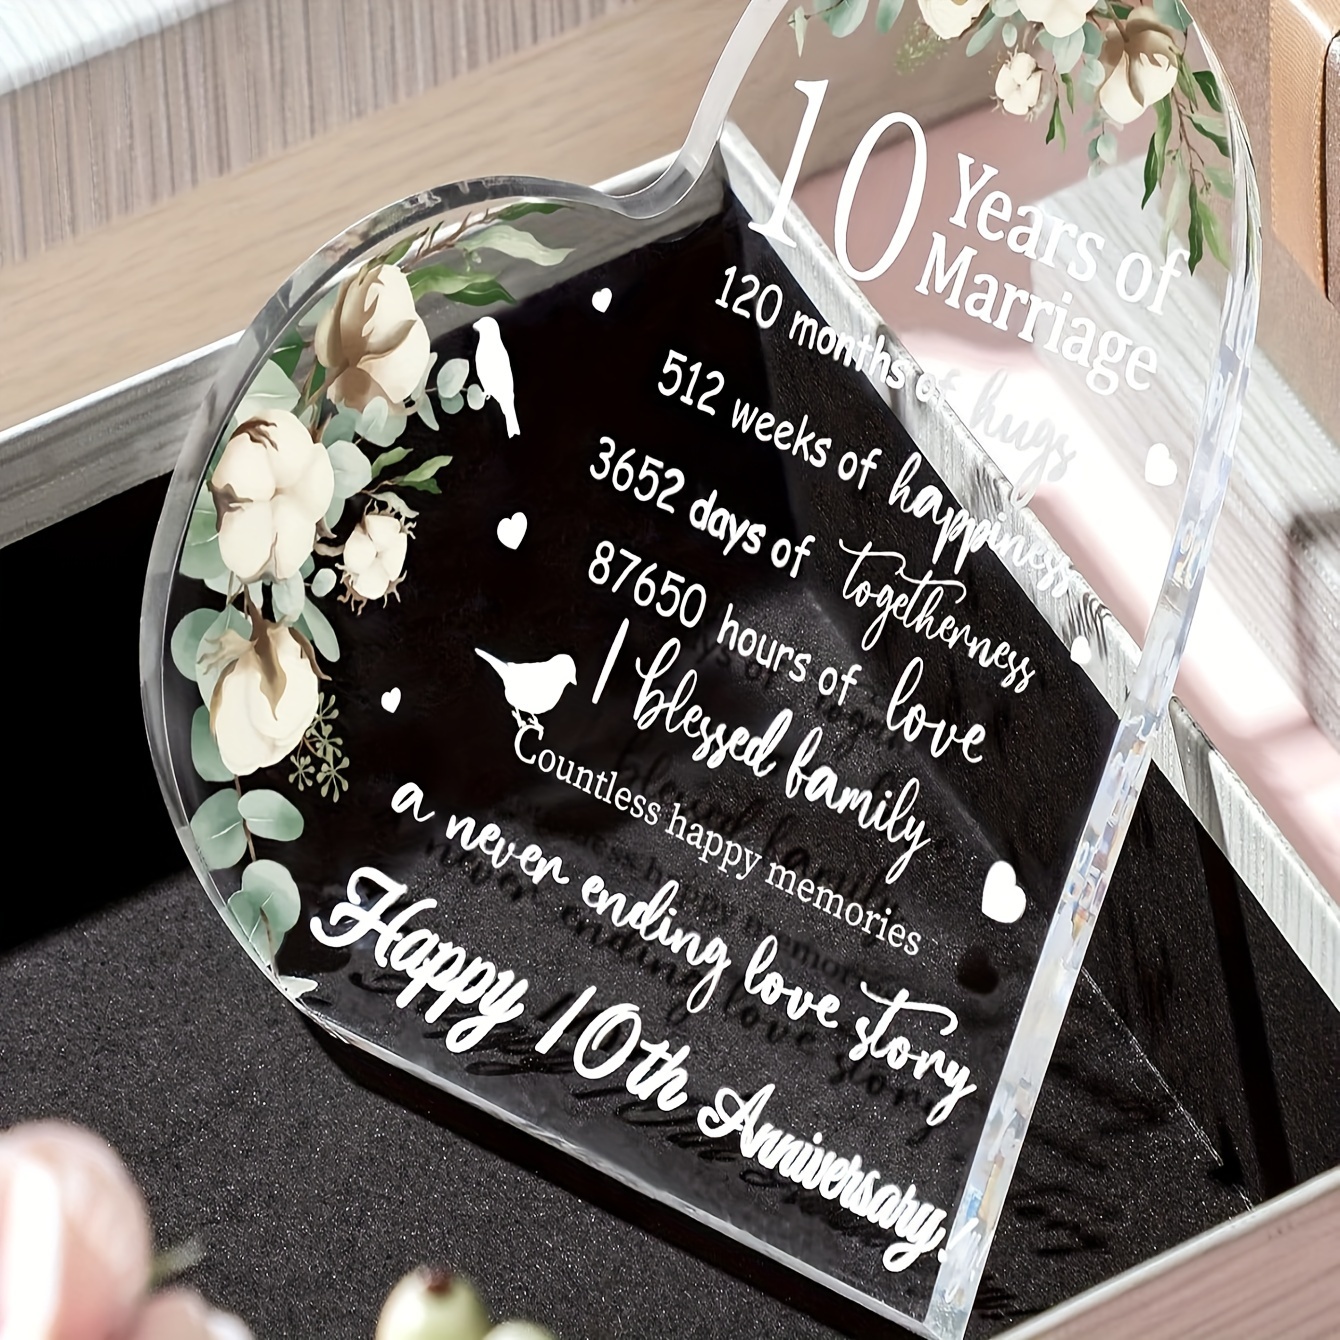  Wedding Gift for Her Years of Marriage Gift Happy Anniversary  Present for Woman Acrylic Heart Marriage Keepsake for Wife Husband  Girlfriend Boyfriend (Love Style) : Home & Kitchen